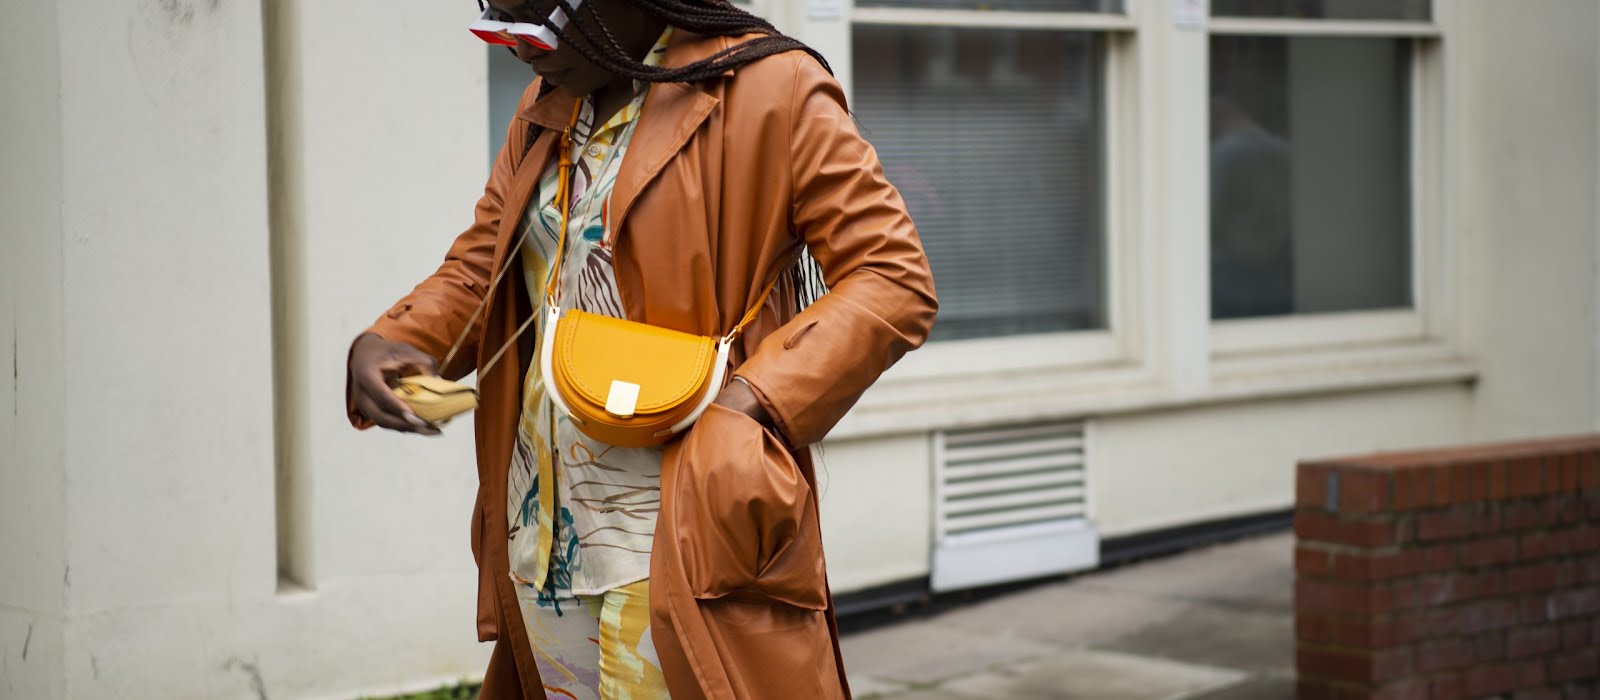 The best street style from London Fashion Week to inspire your back-to-work wardrobe